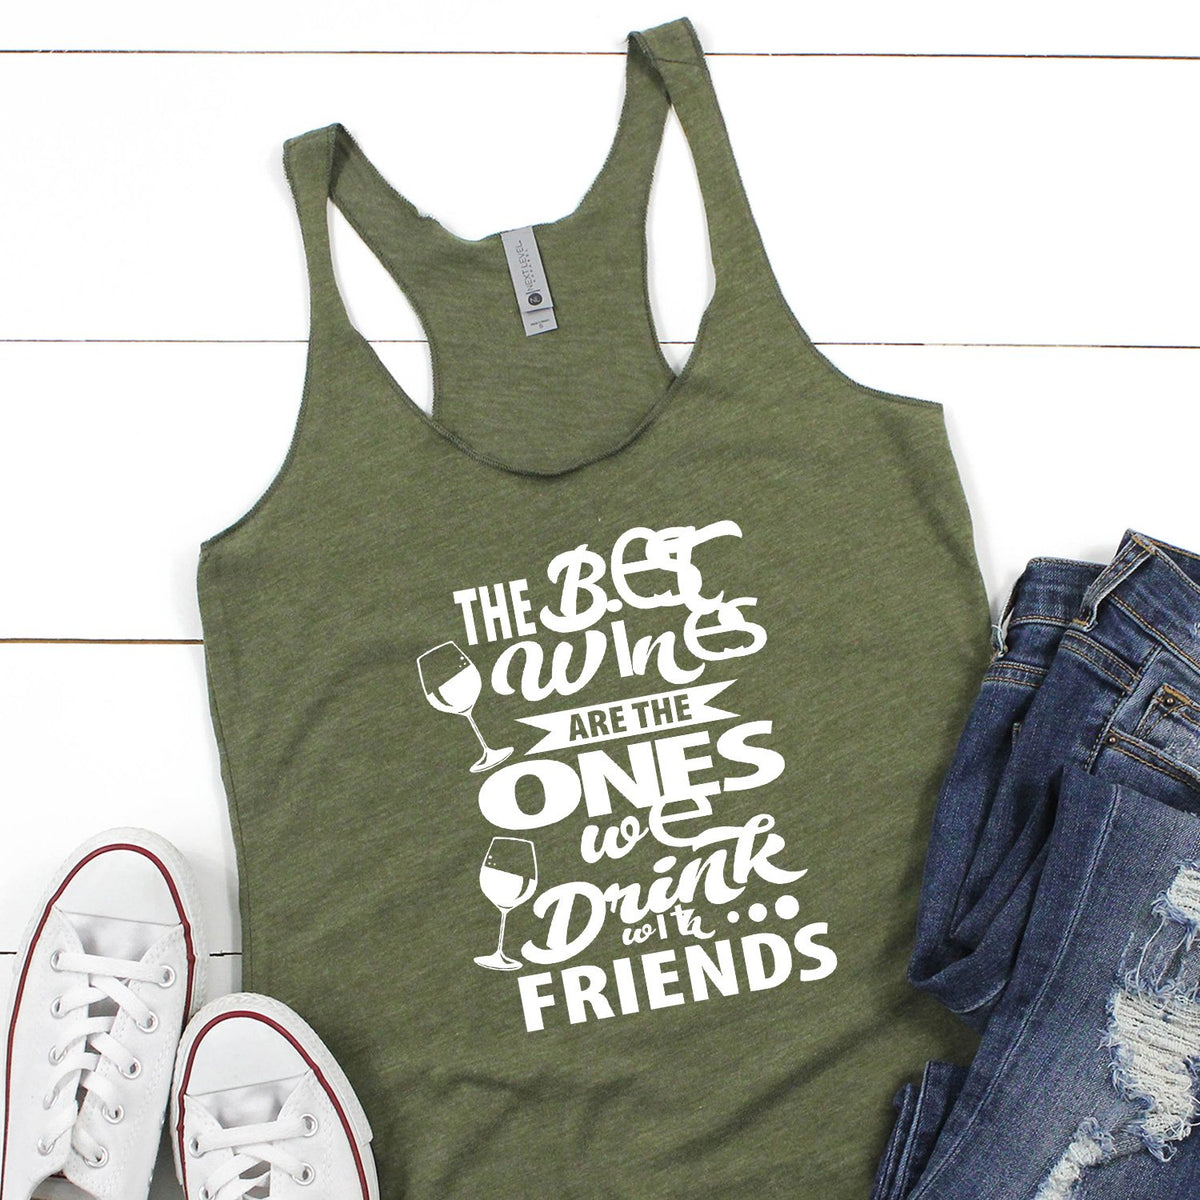 The Best Wines Are The Ones We Drink With Friends - Tank Top Racerback